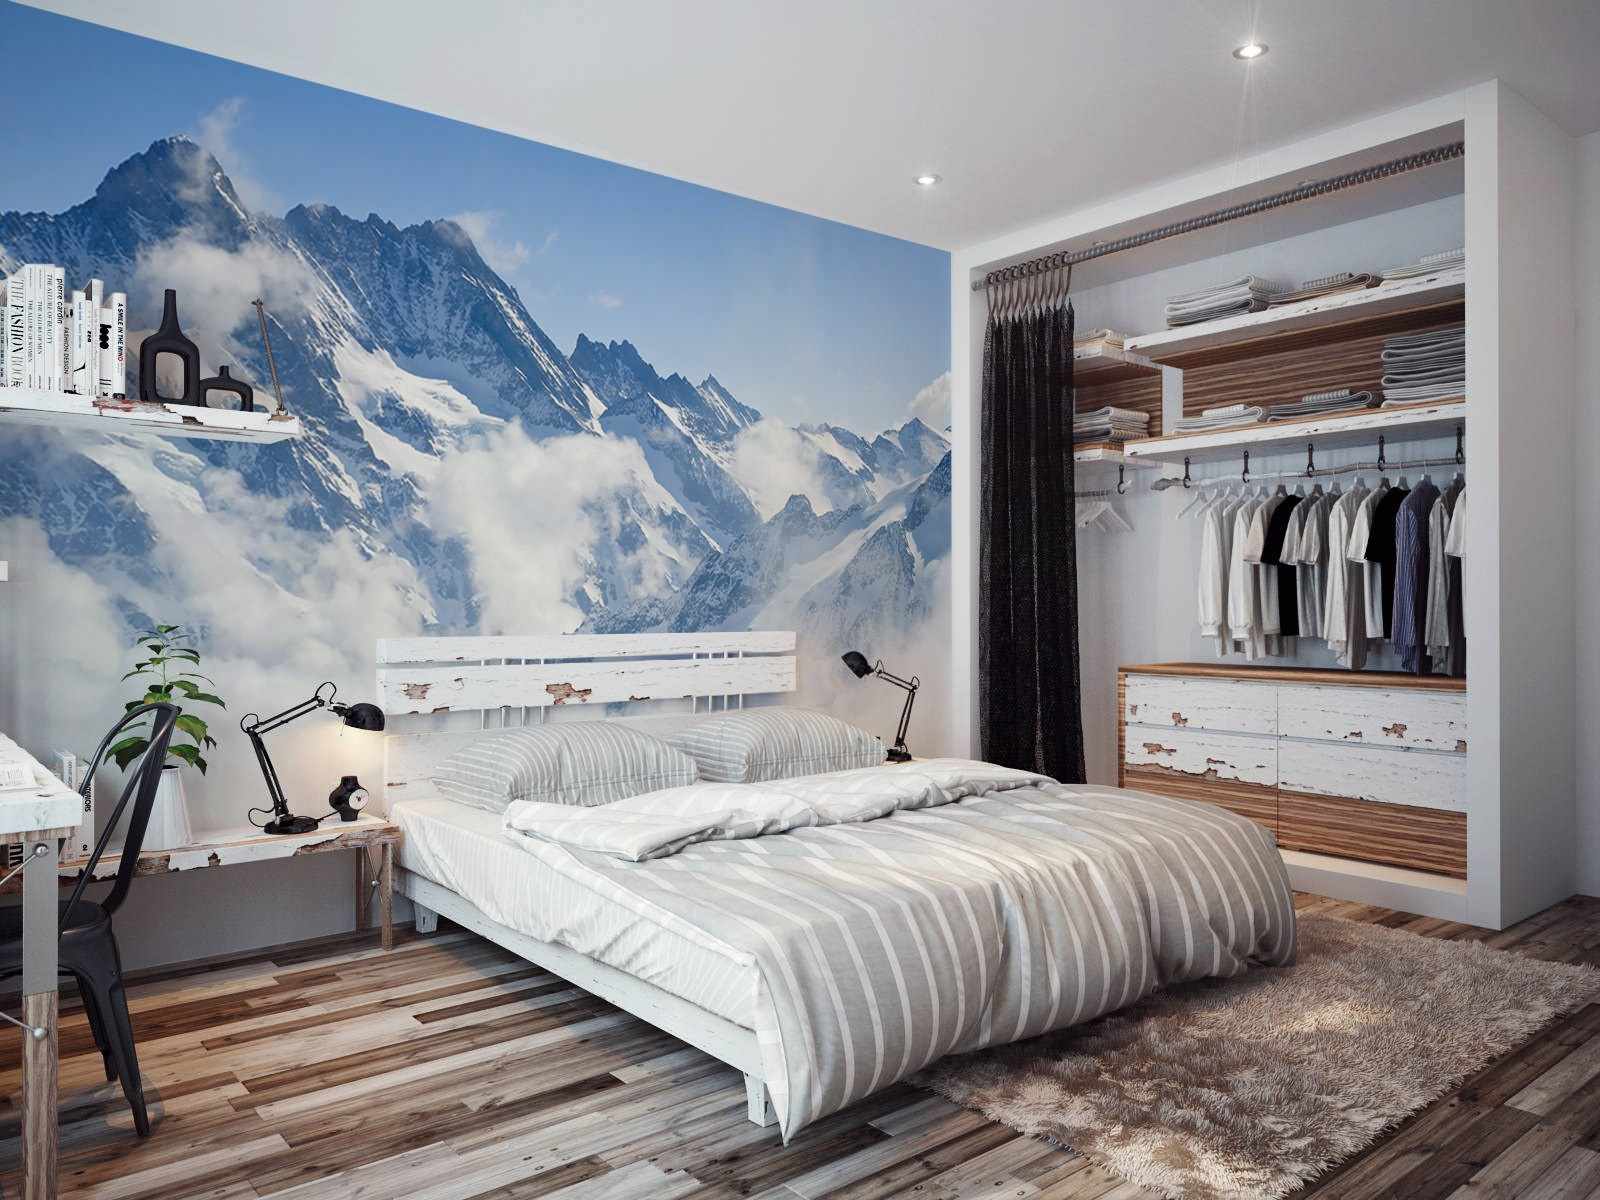 option for unusual design of the walls in the bedroom